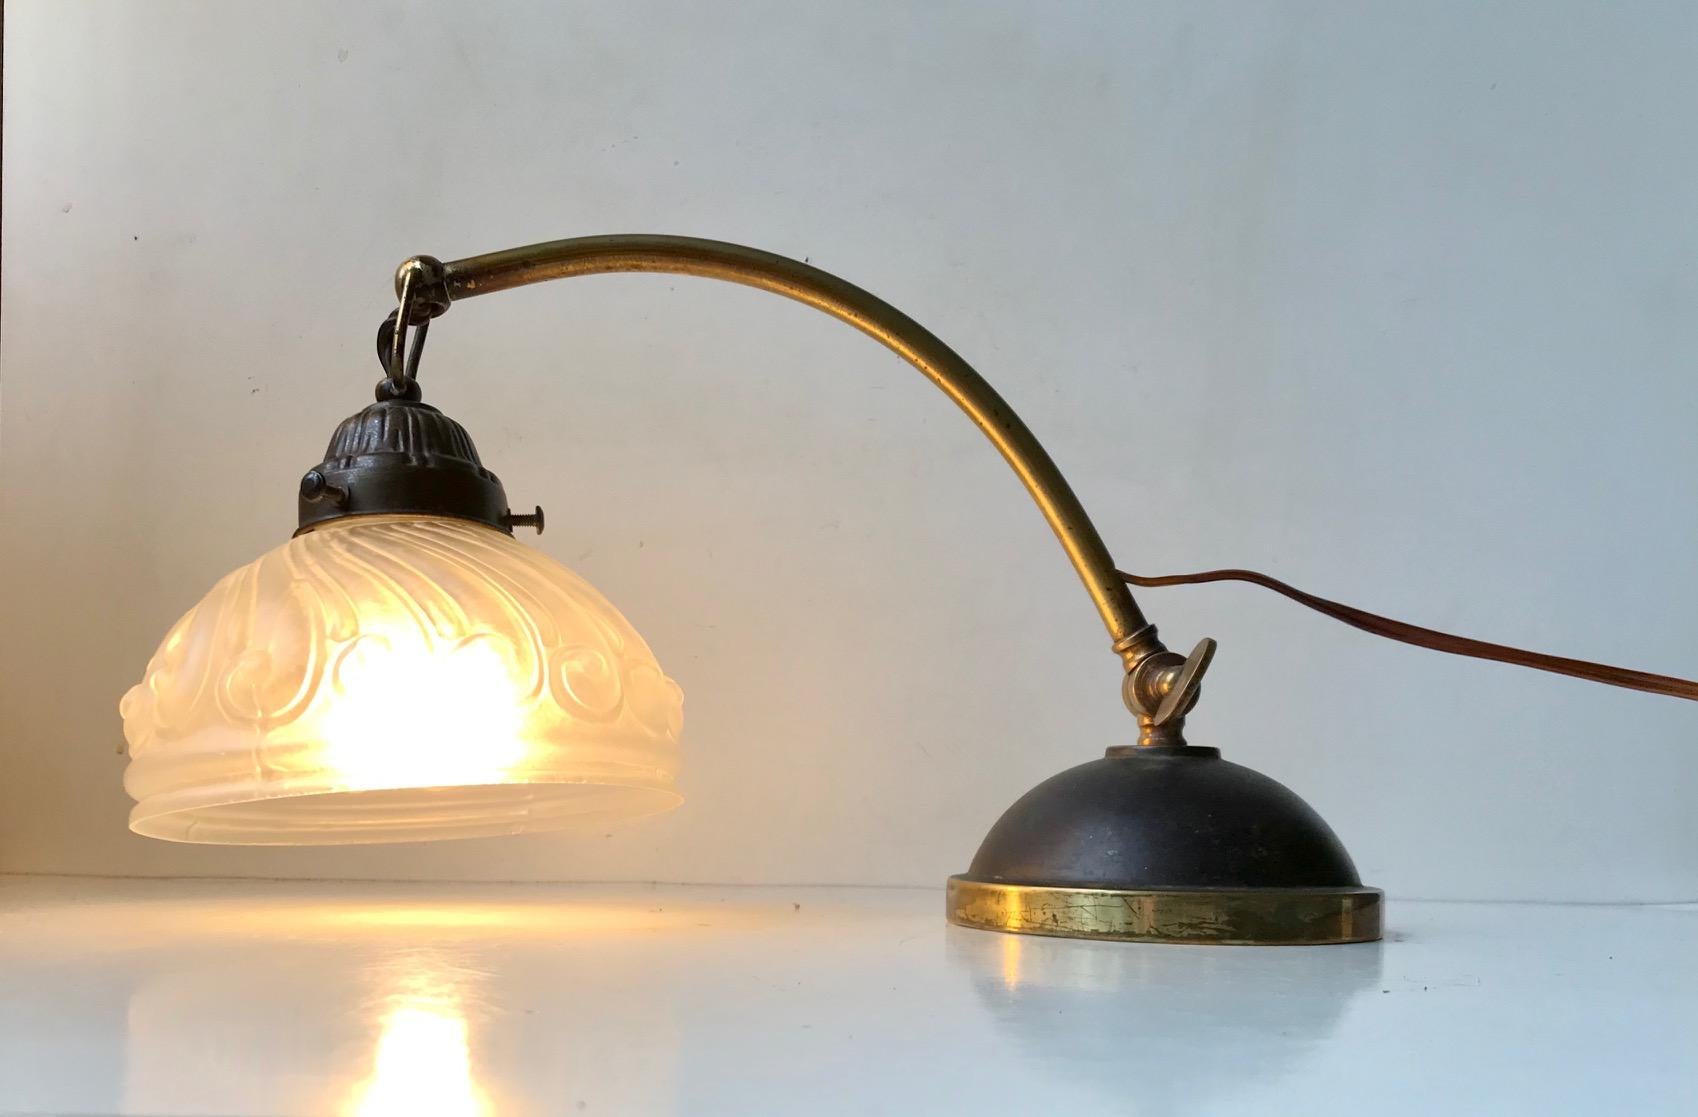 Italian Art Deco Table Lamp in Brass and Glass, 1930s For Sale 5